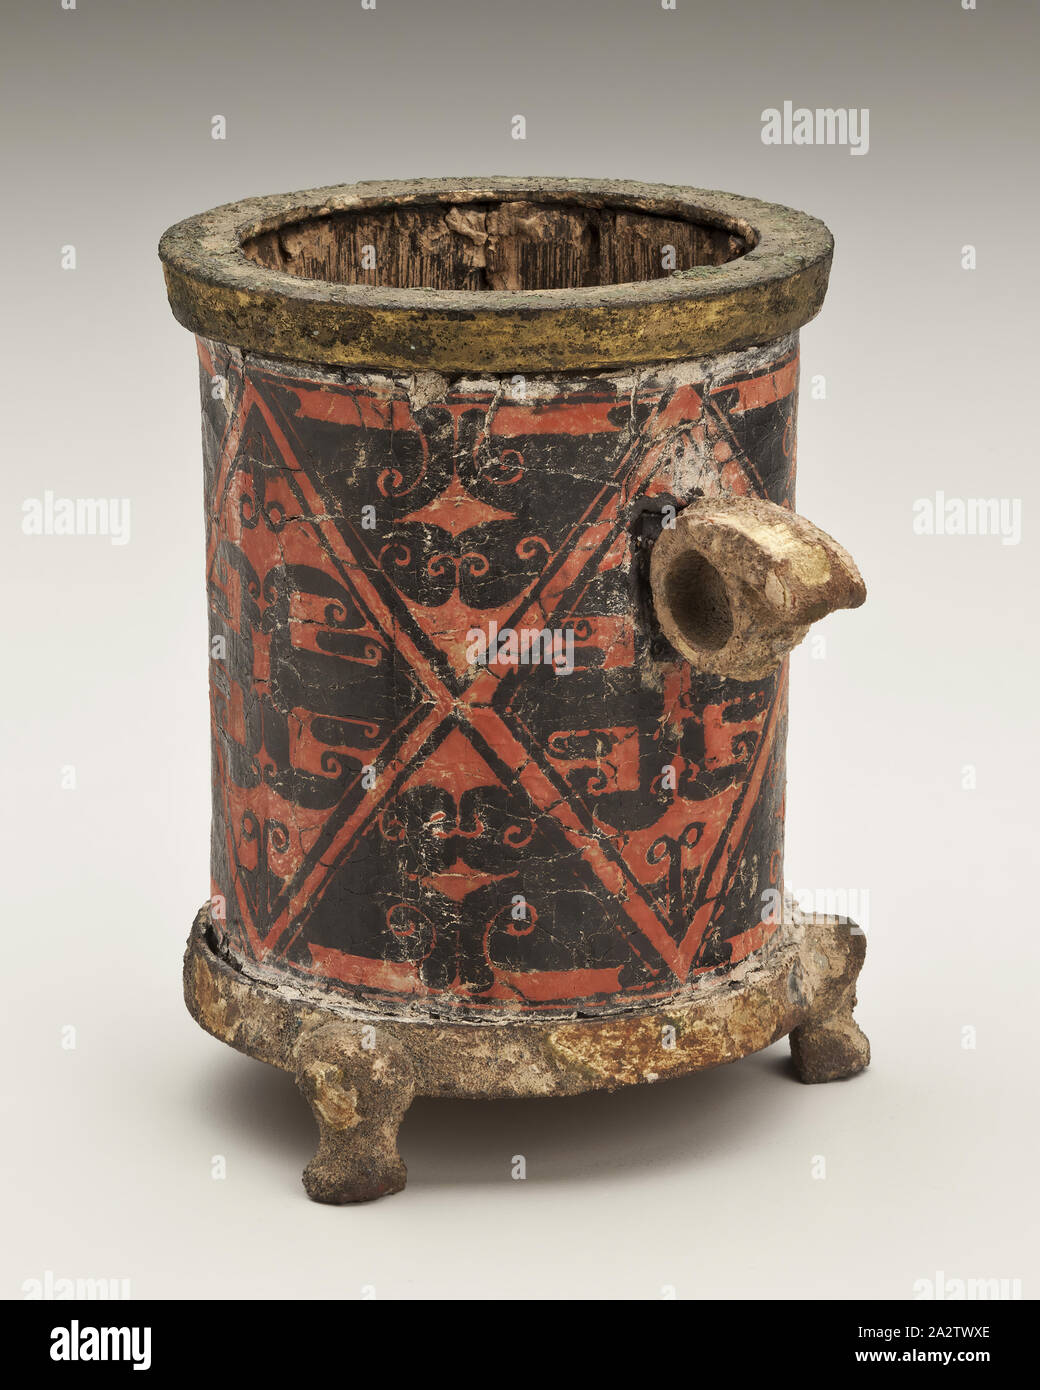 lacquer cup with handle, Eastern Zhou dynasty, Eastern Zhou dynasty, 300-200 B.C.E., Lacquer On Bamboo, red, Black Painted Decoration, H: 4-3.8, Asian Art Stock Photo